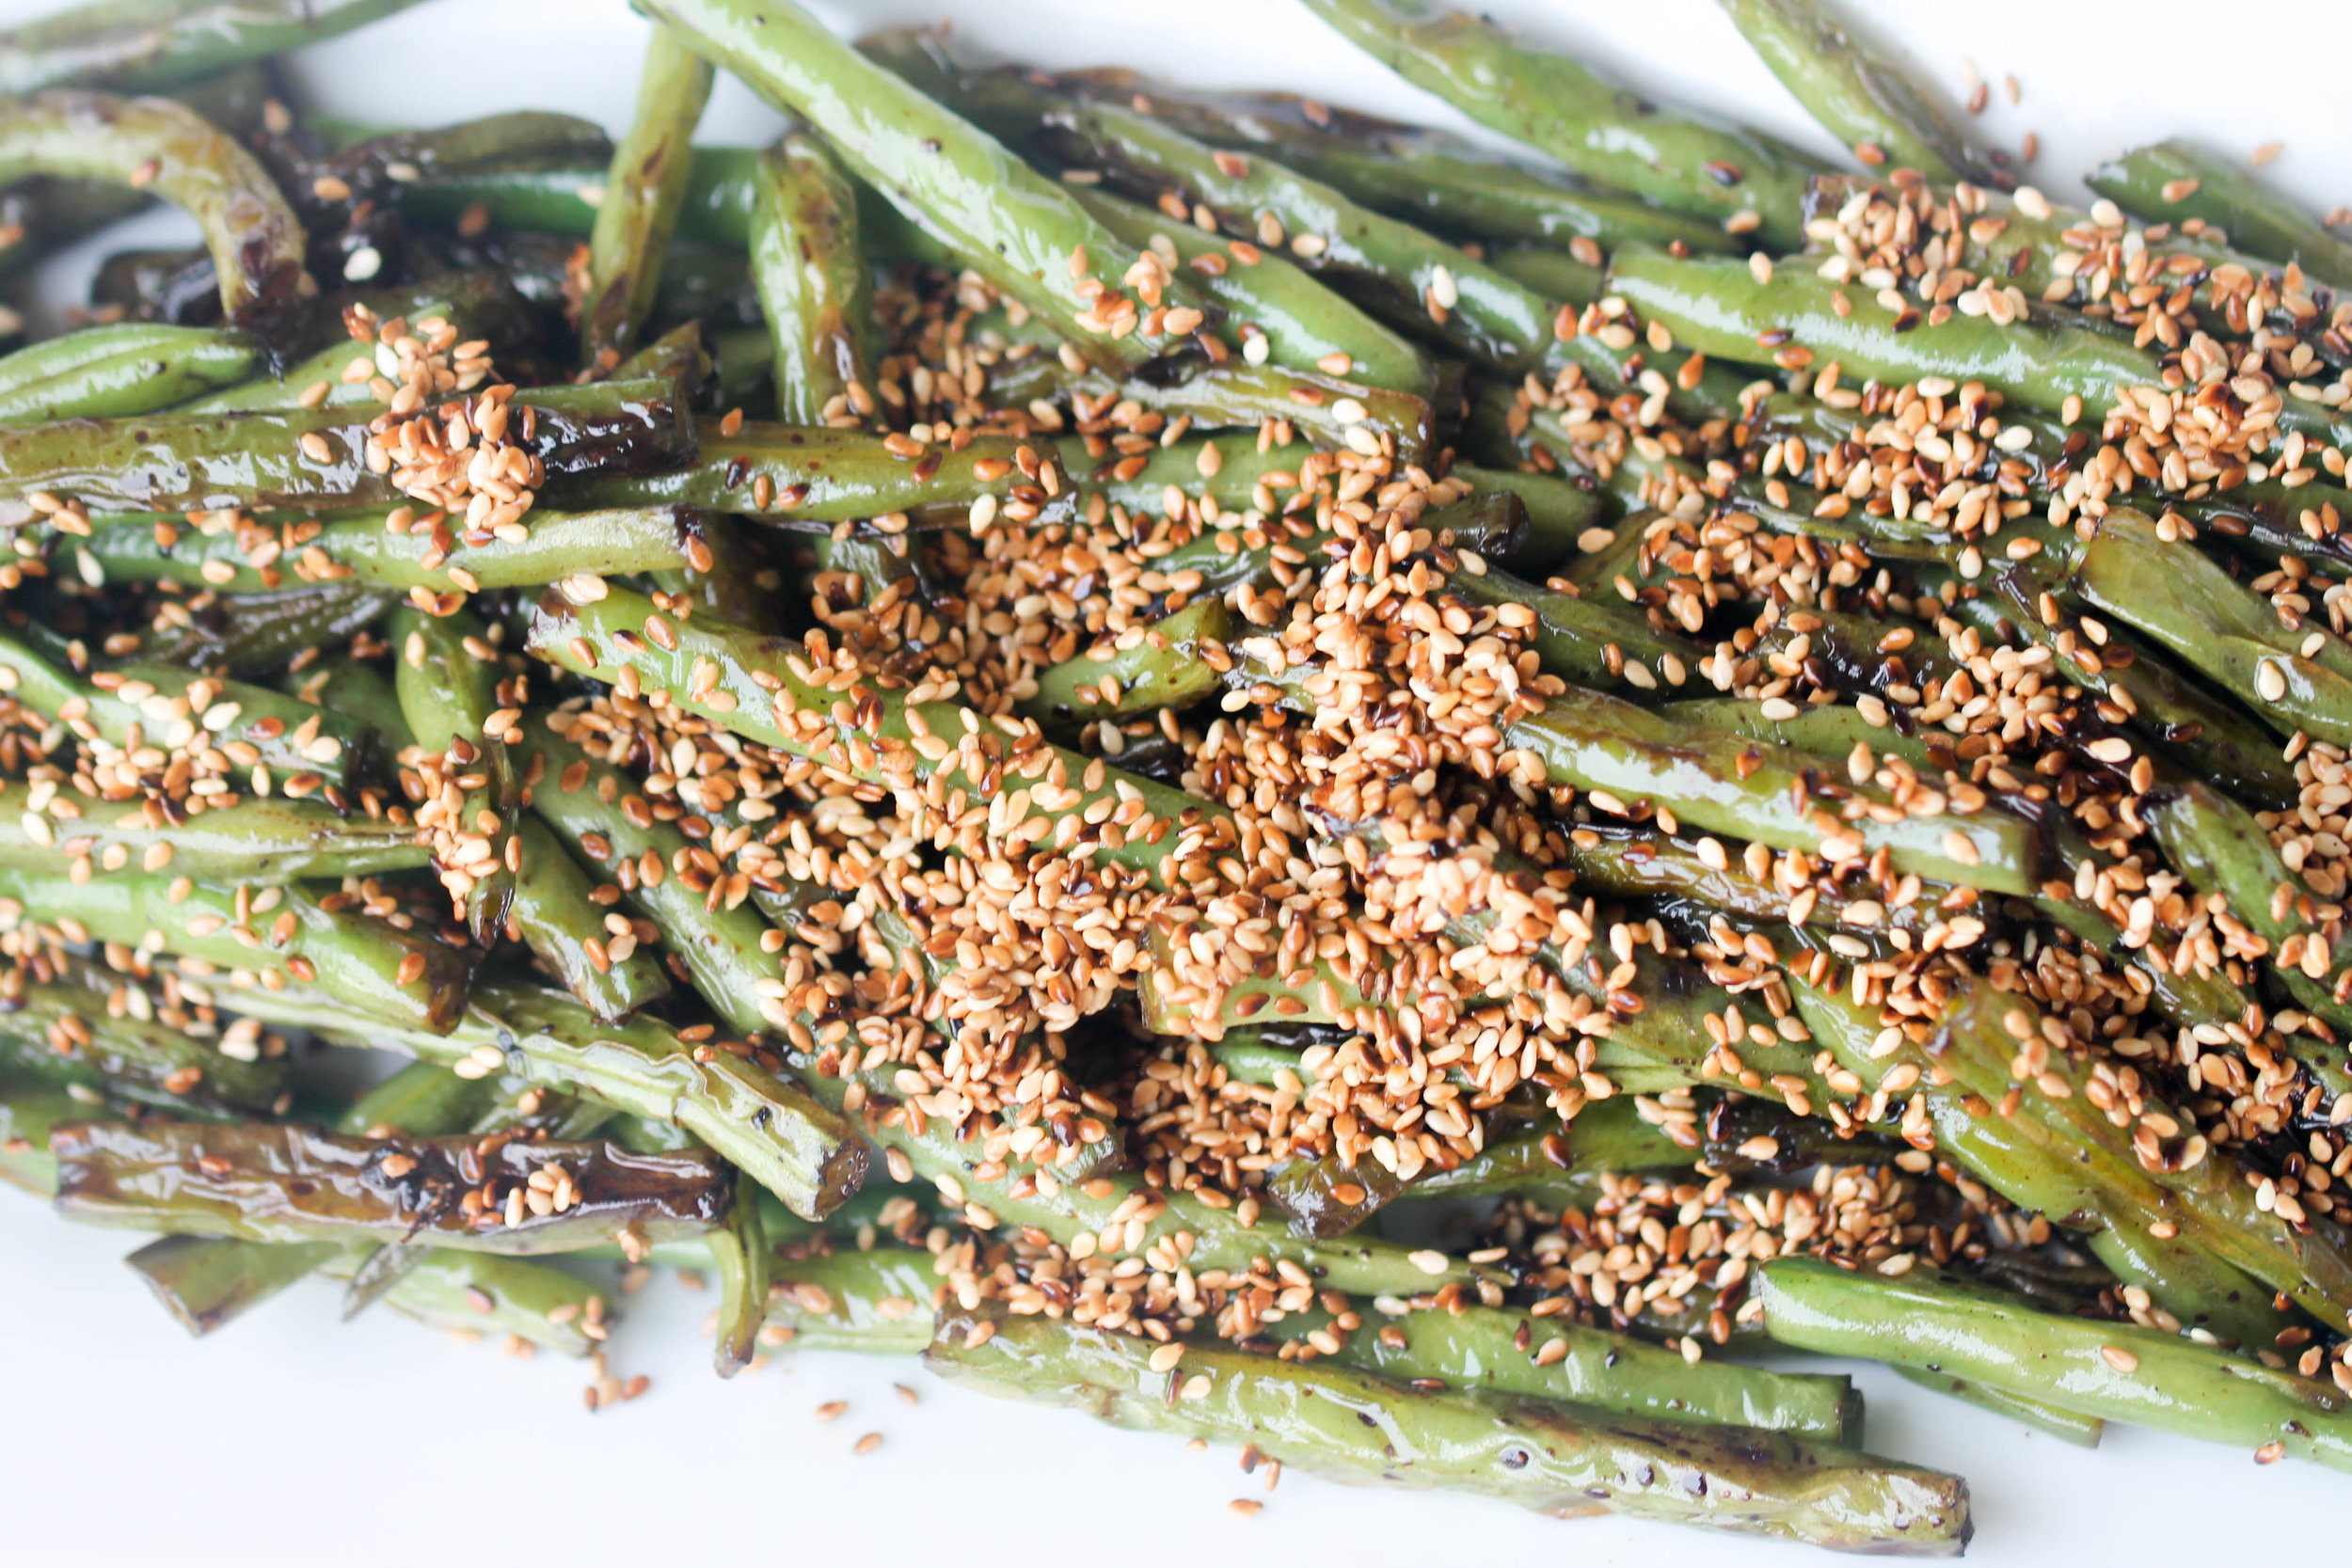 Green Beans with Sesame are perfect as a side for a quick weeknight dinner or for parties. Takes only 15 minutes and less than 5 ingredients to make. Naturally vegan & can be made gluten-free!